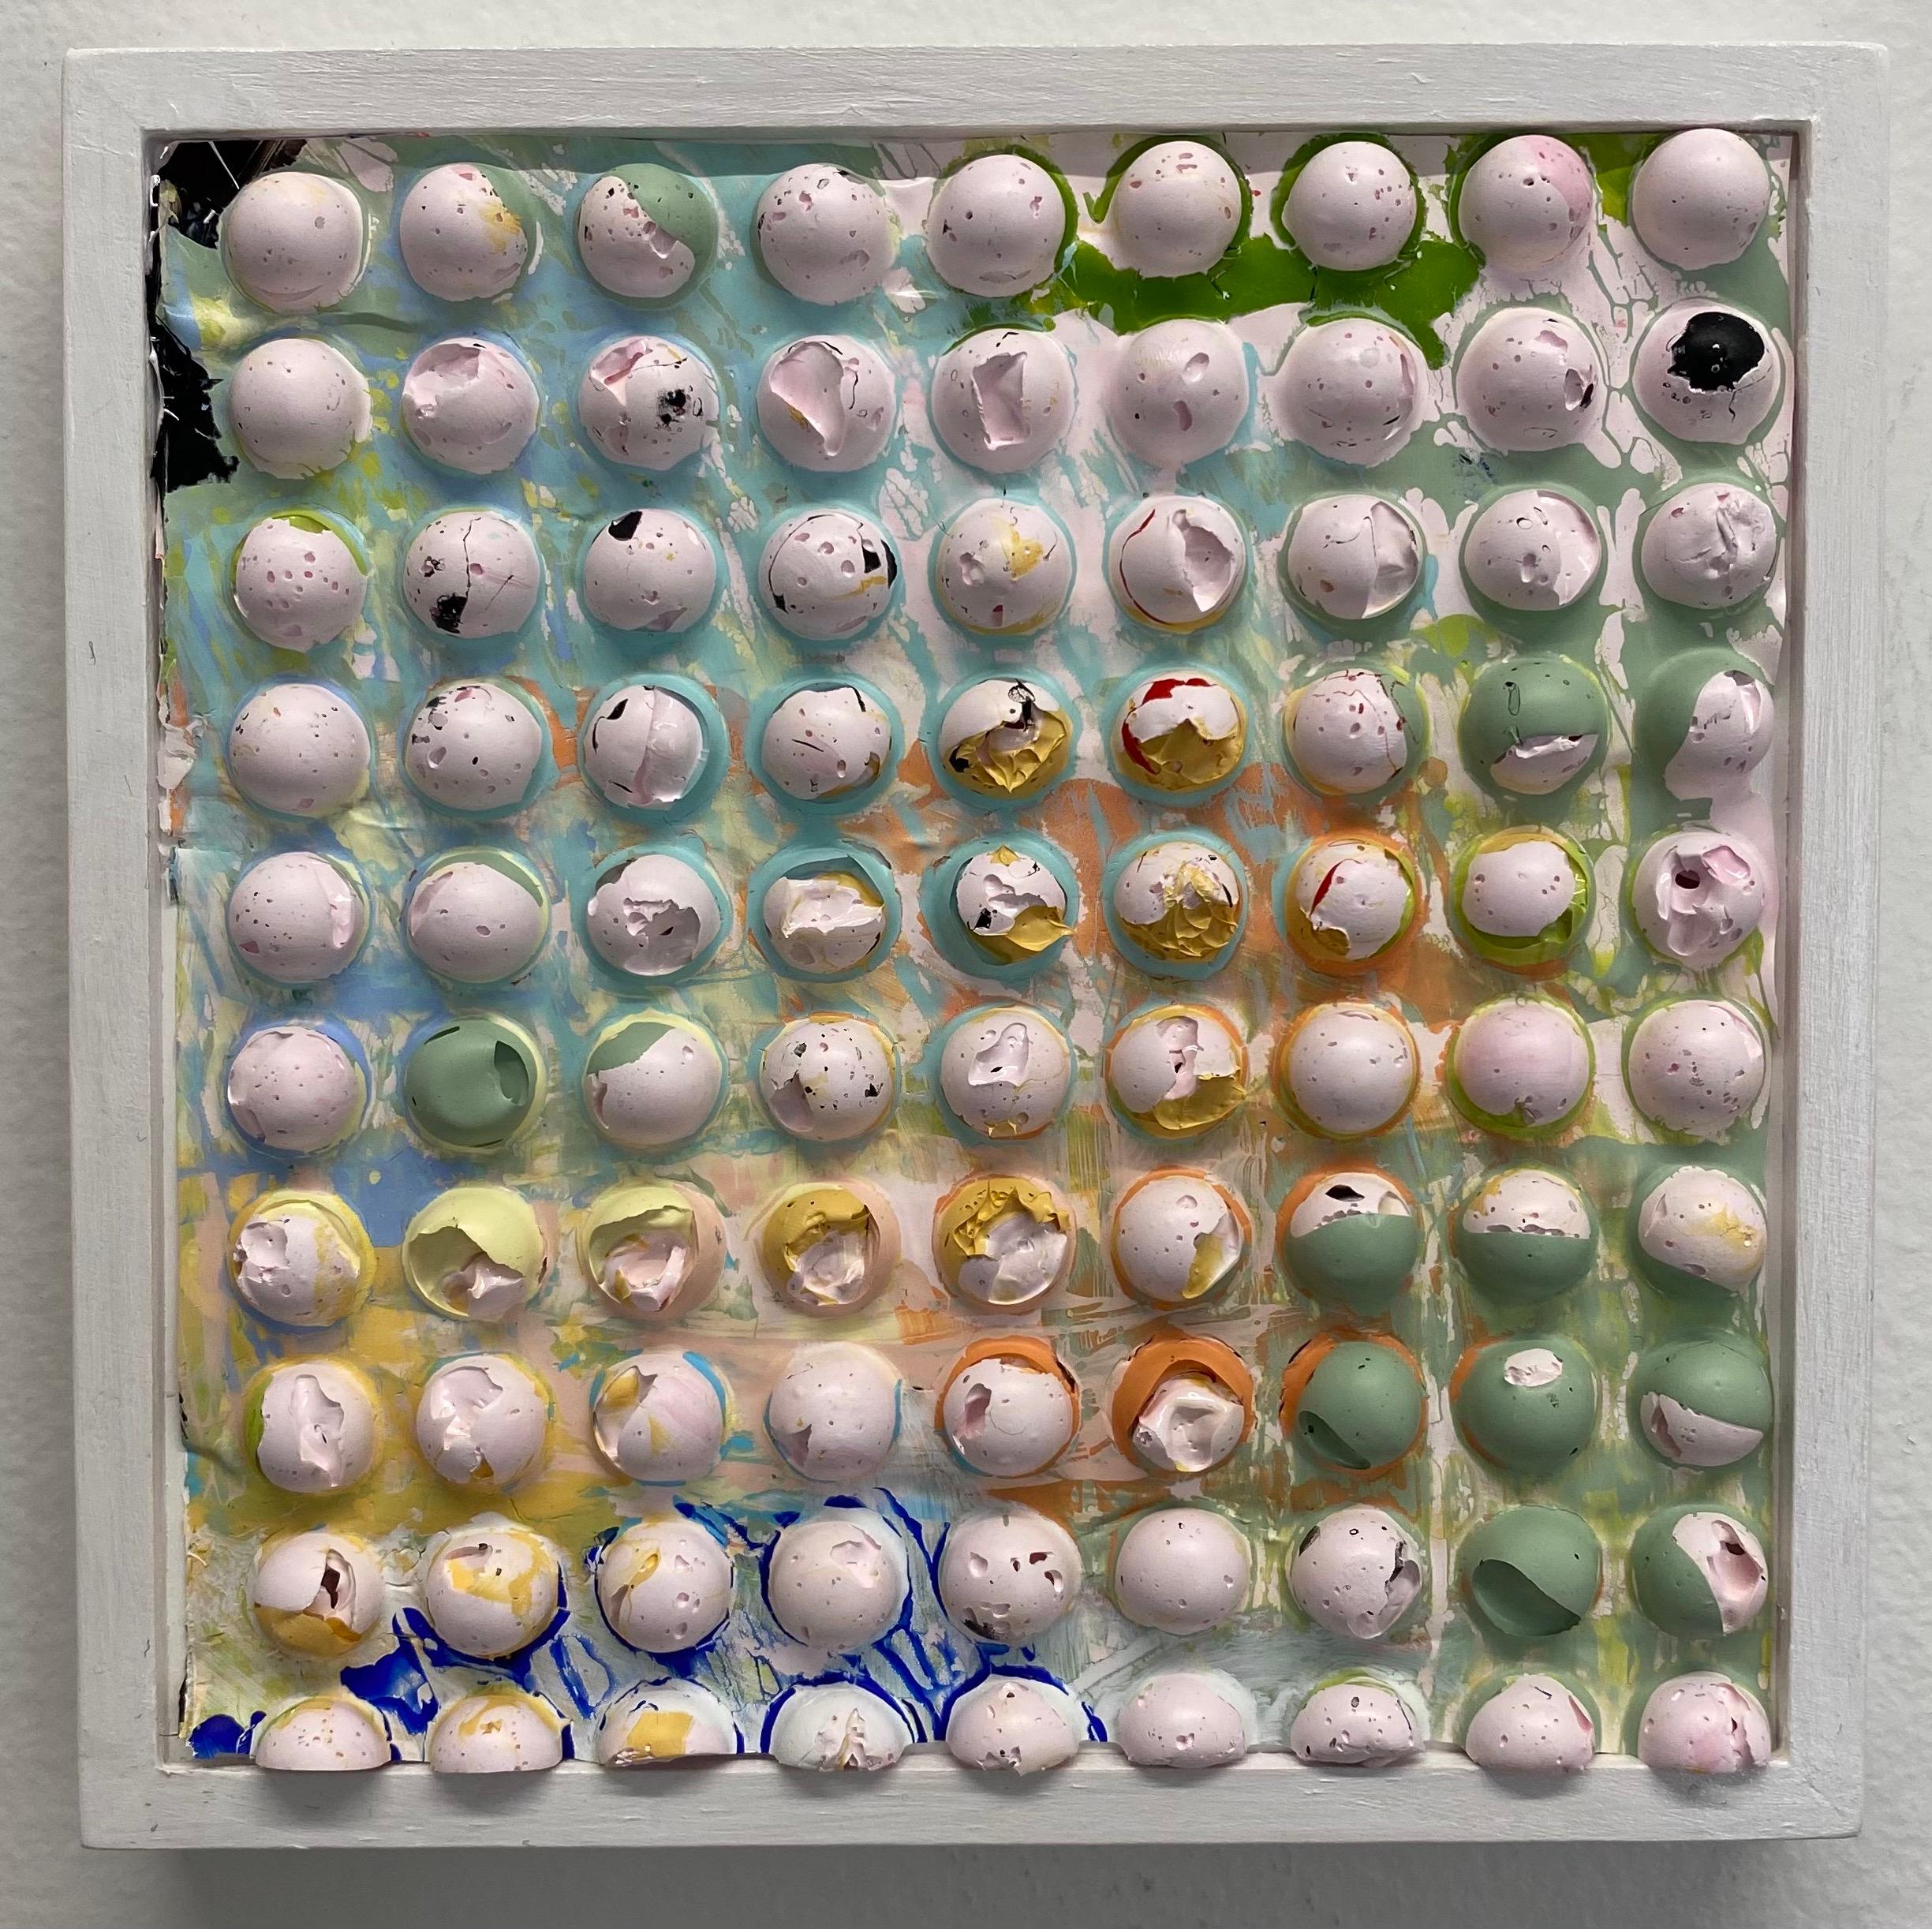 Natalie Harrison Abstract Sculpture - MULTICOLOR CIRCLE QUILT, 2 - Framed, Textured, Sculptural, Molded Acrylic Painti